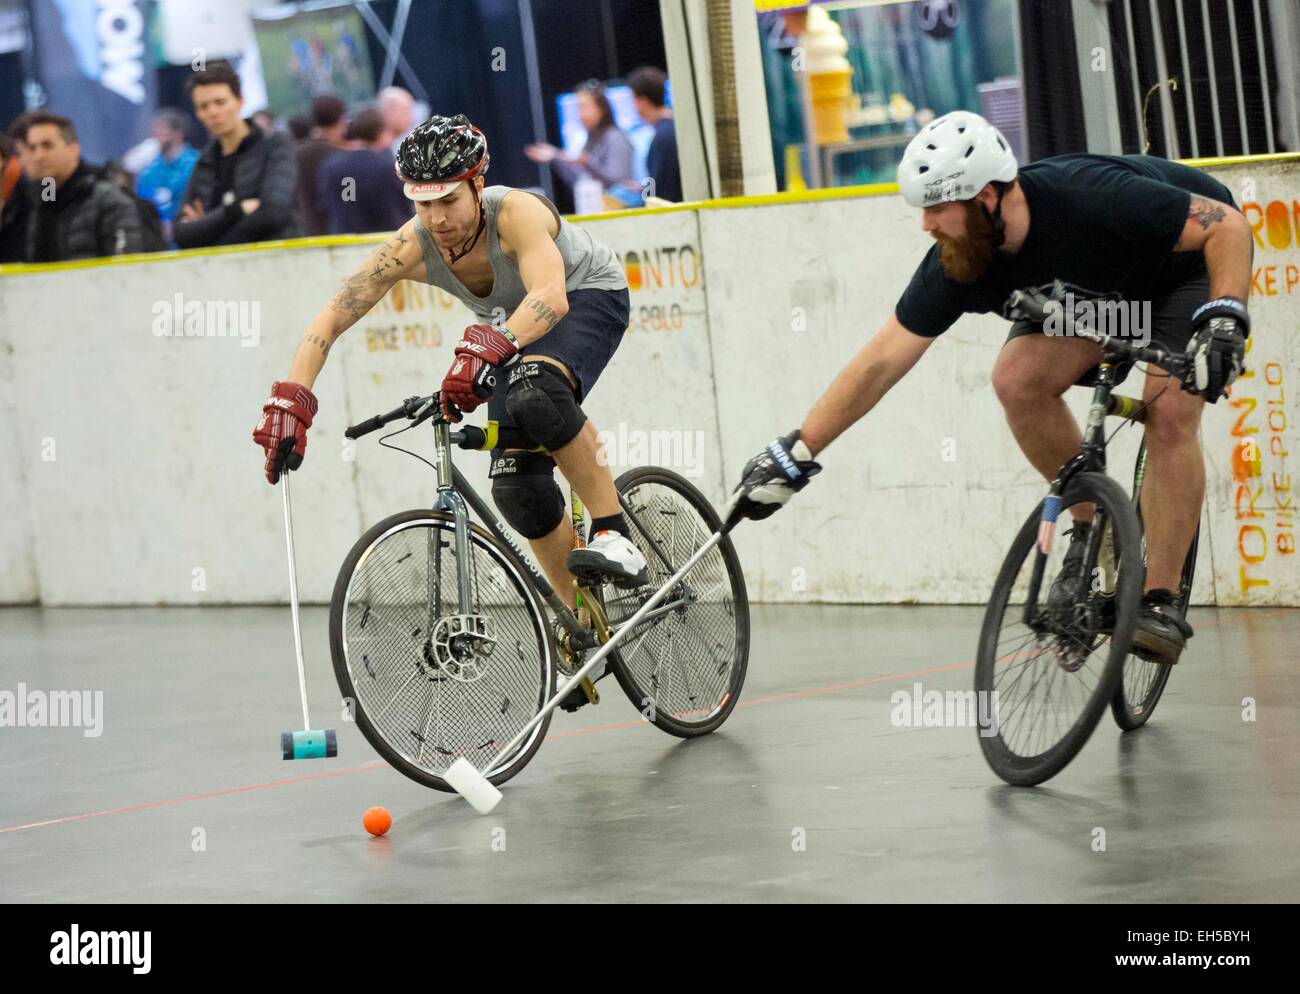 Toronto, Canada. 6th Mar, 2015. Participants compete during the Great Lakes Winter Classic 3 Bike Pole Tournament at Exhibition Place in Toronto, Canada, March 6, 2015. Kicked off on Friday, this annual three-day event drew 20 teams from around Canada and the United States. © Zou Zheng/Xinhua/Alamy Live News Stock Photo